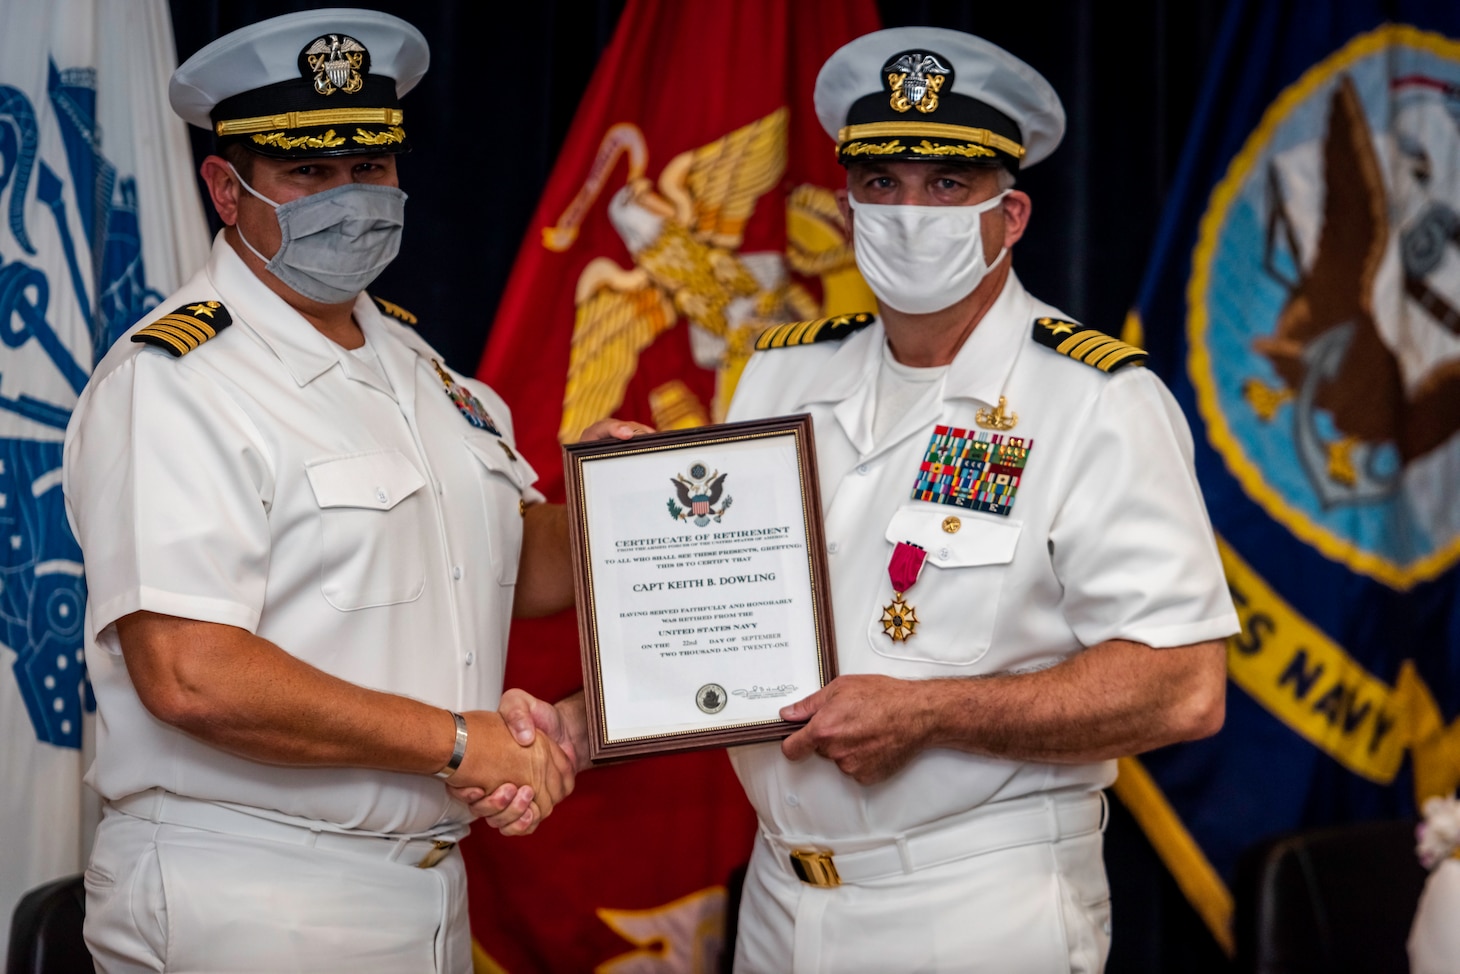 Capt. Dean Muriano, left, commanding officer, Center for Explosive Ordnance Disposal and Diving, presents Capt. Keith Dowling with a certificate of retirement during a change of command for the Center for Explosive Ordnance Disposal and Diving (CEODD) and retirement ceremony for Dowling.  Dowling concluded his nearly 38-year career as CEODD’s commanding officer.